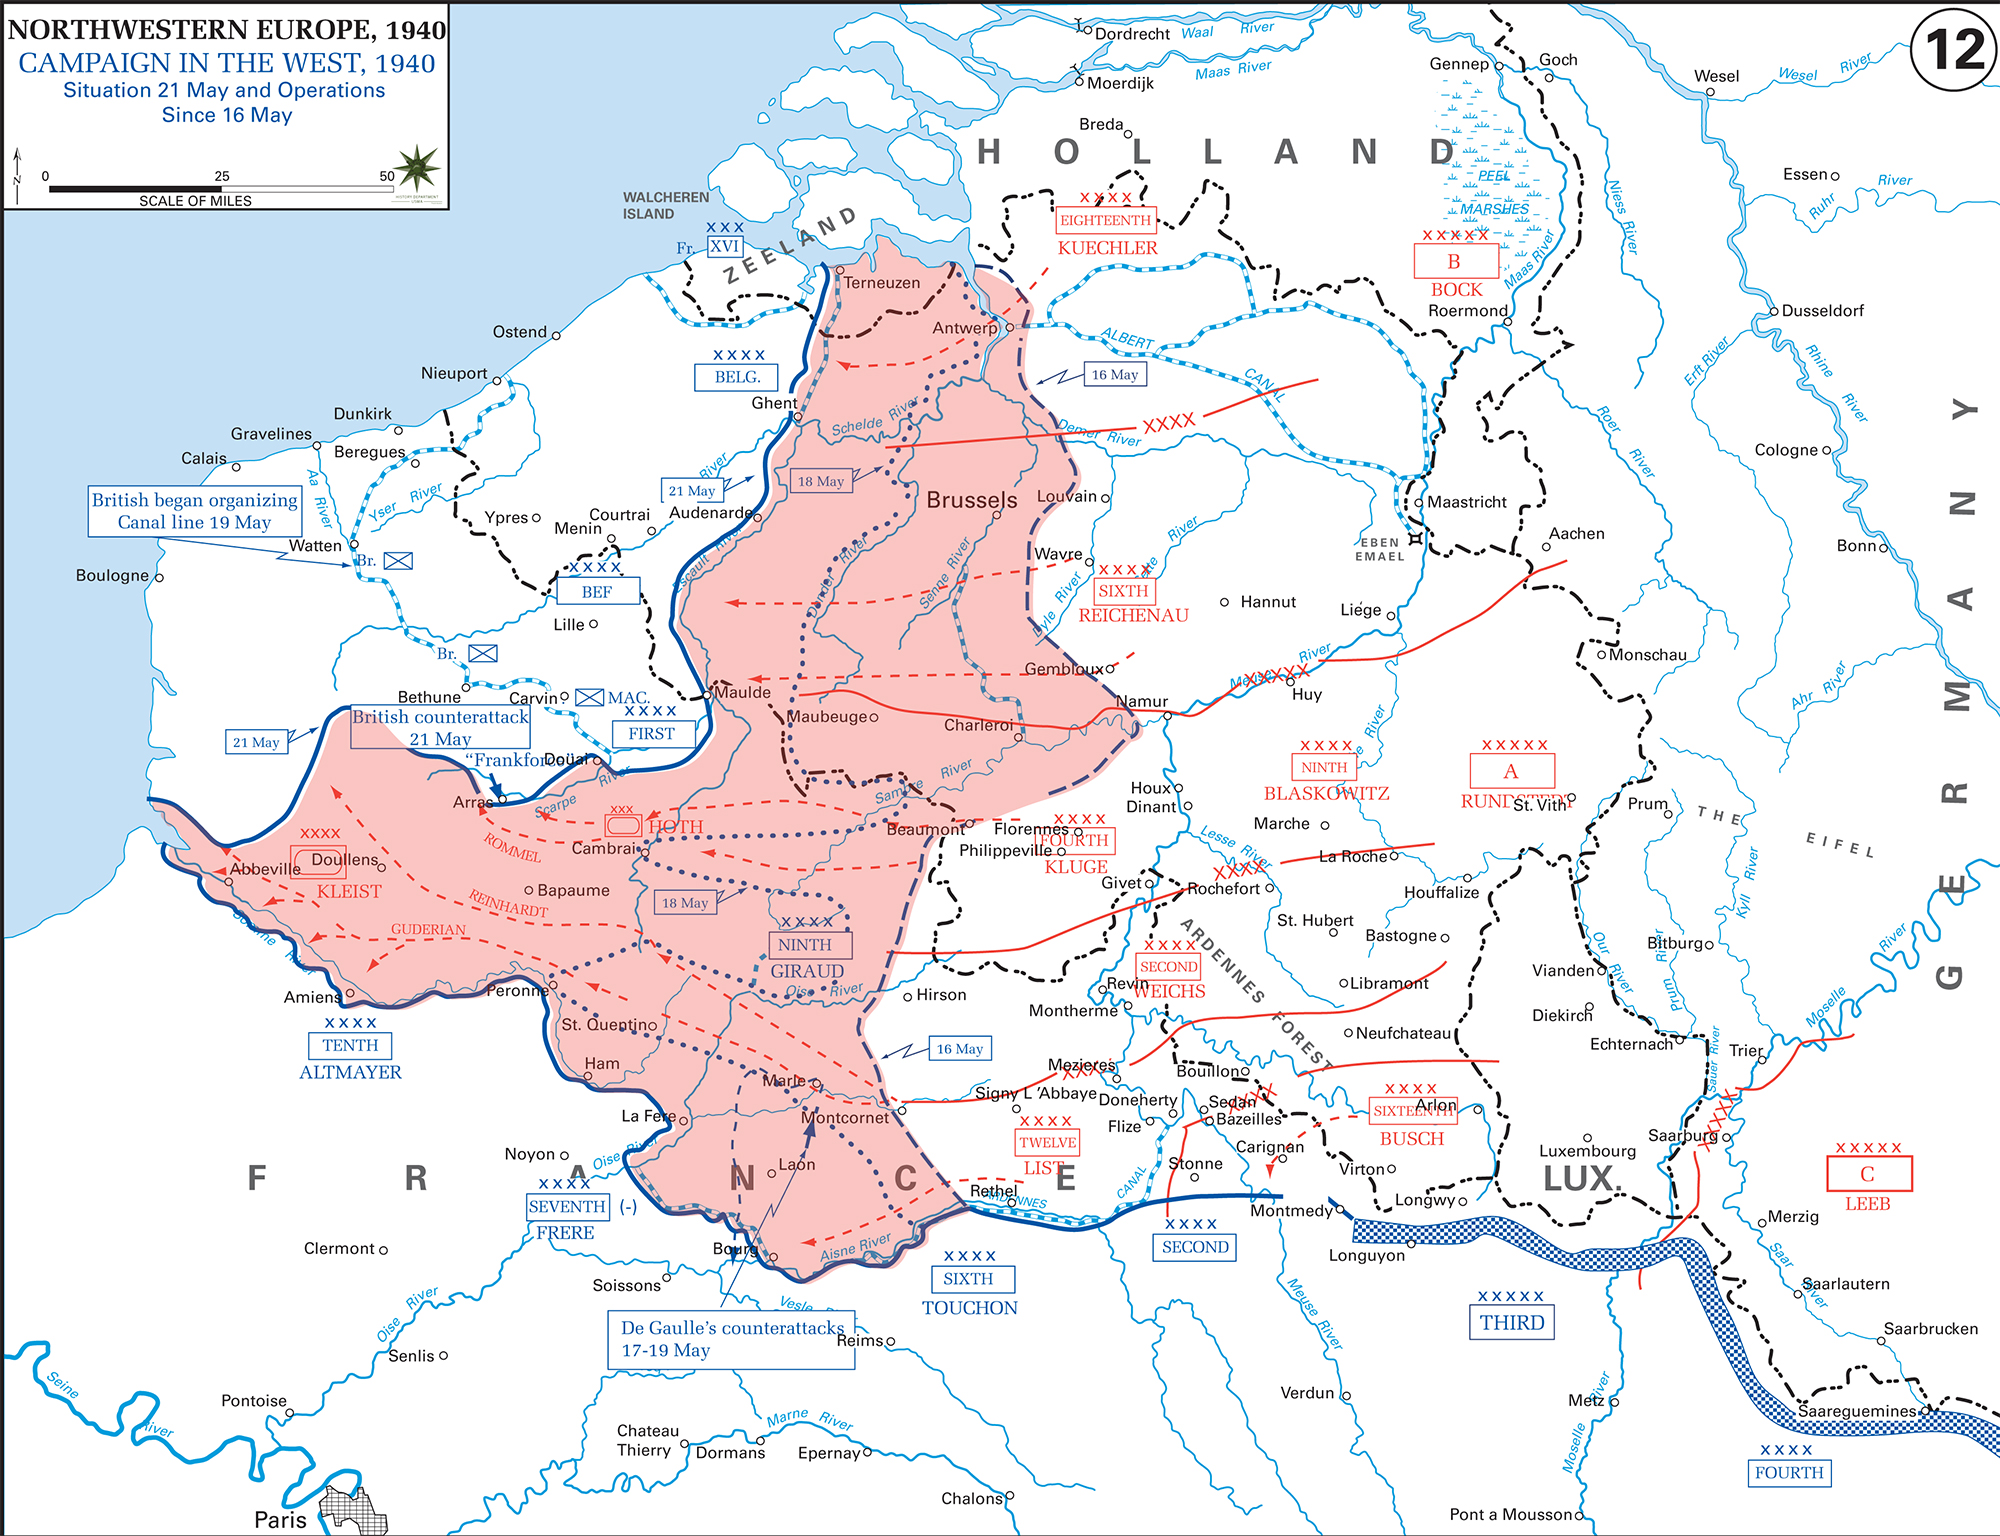 History Map of WWII: The War in the West - Situation and Operations May 16-21, 1940